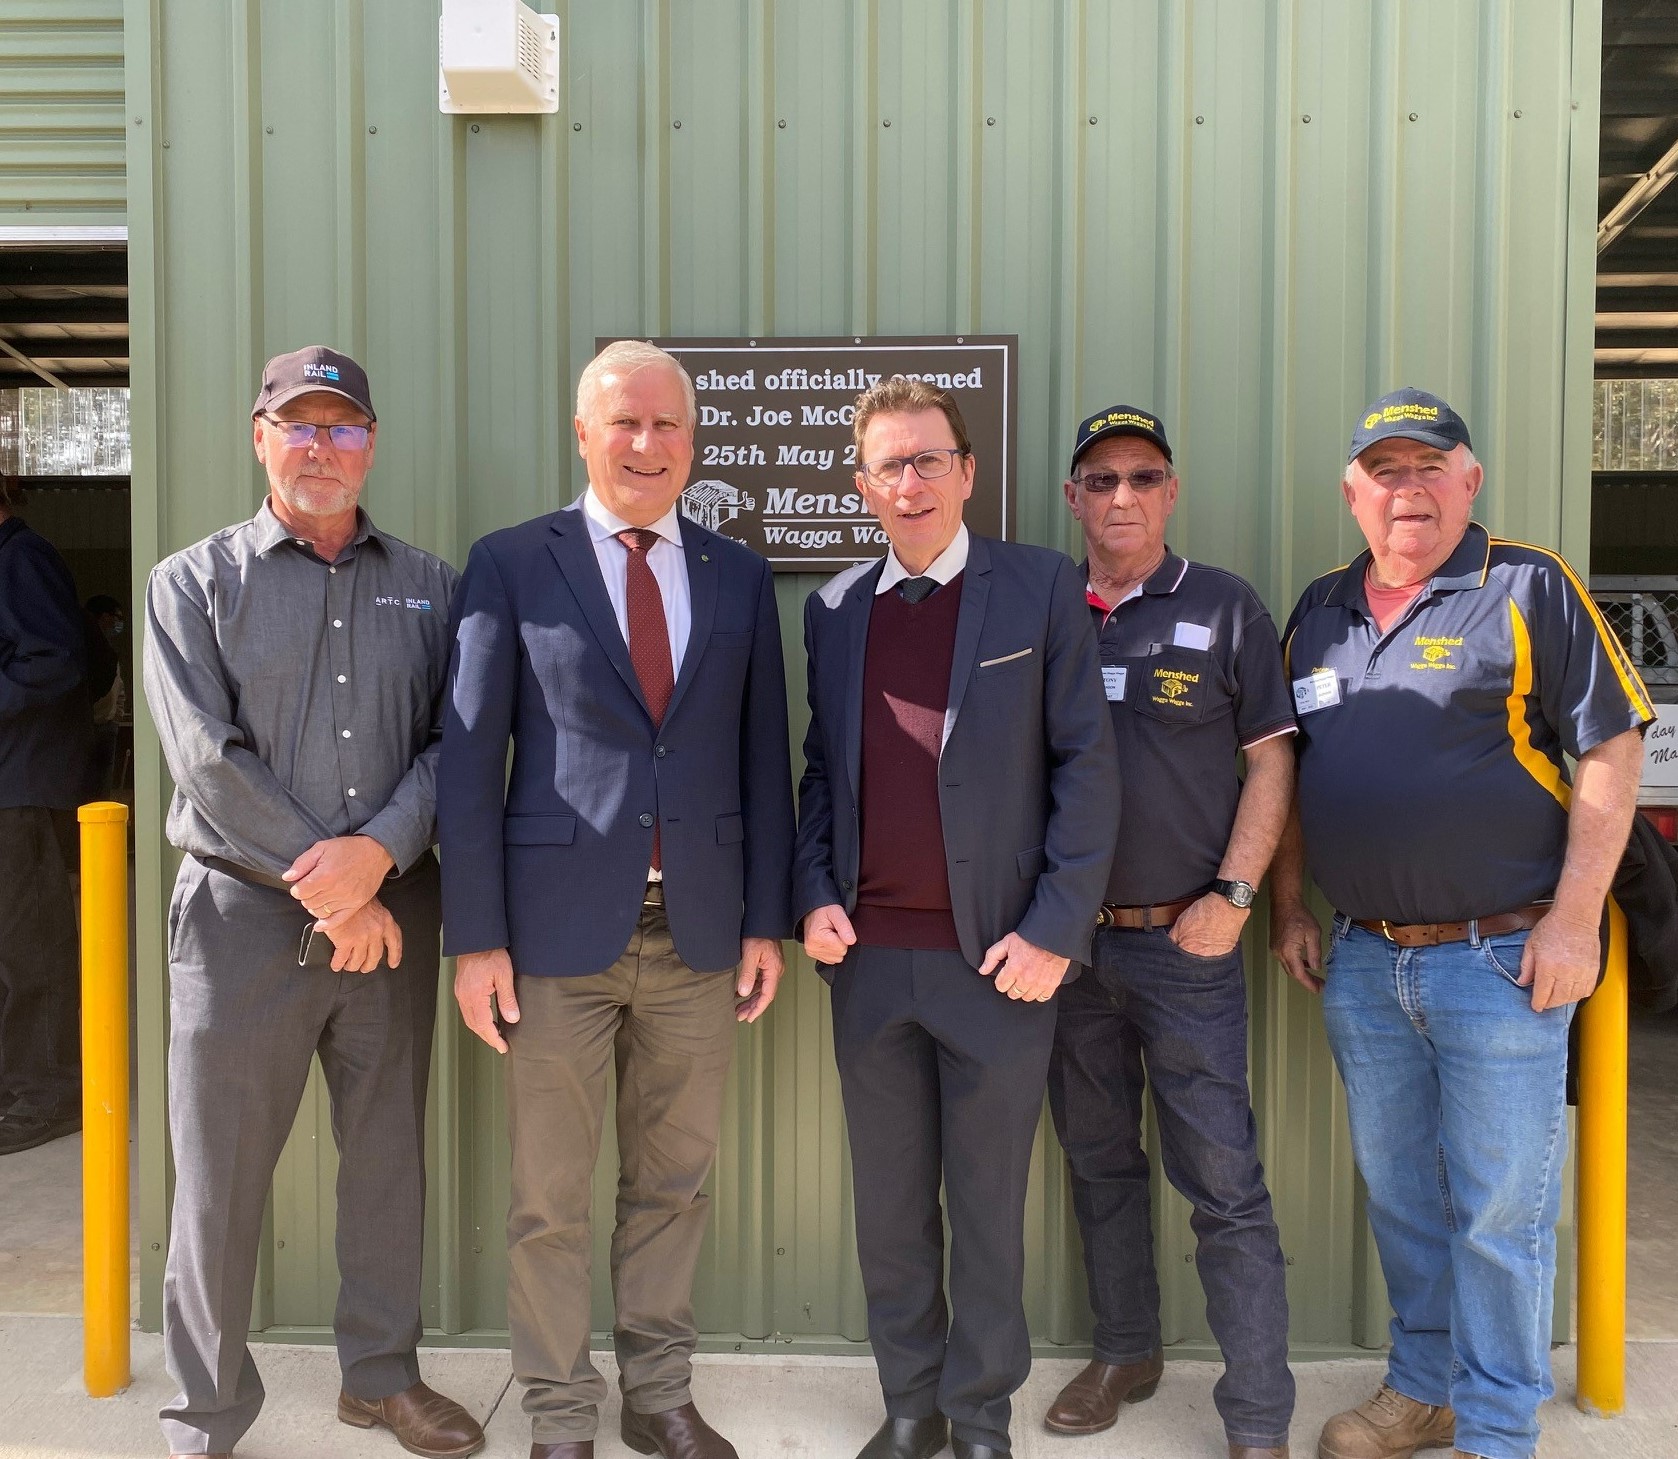 Men gather for photo in front of newly built Menshed in Wagga Wagga